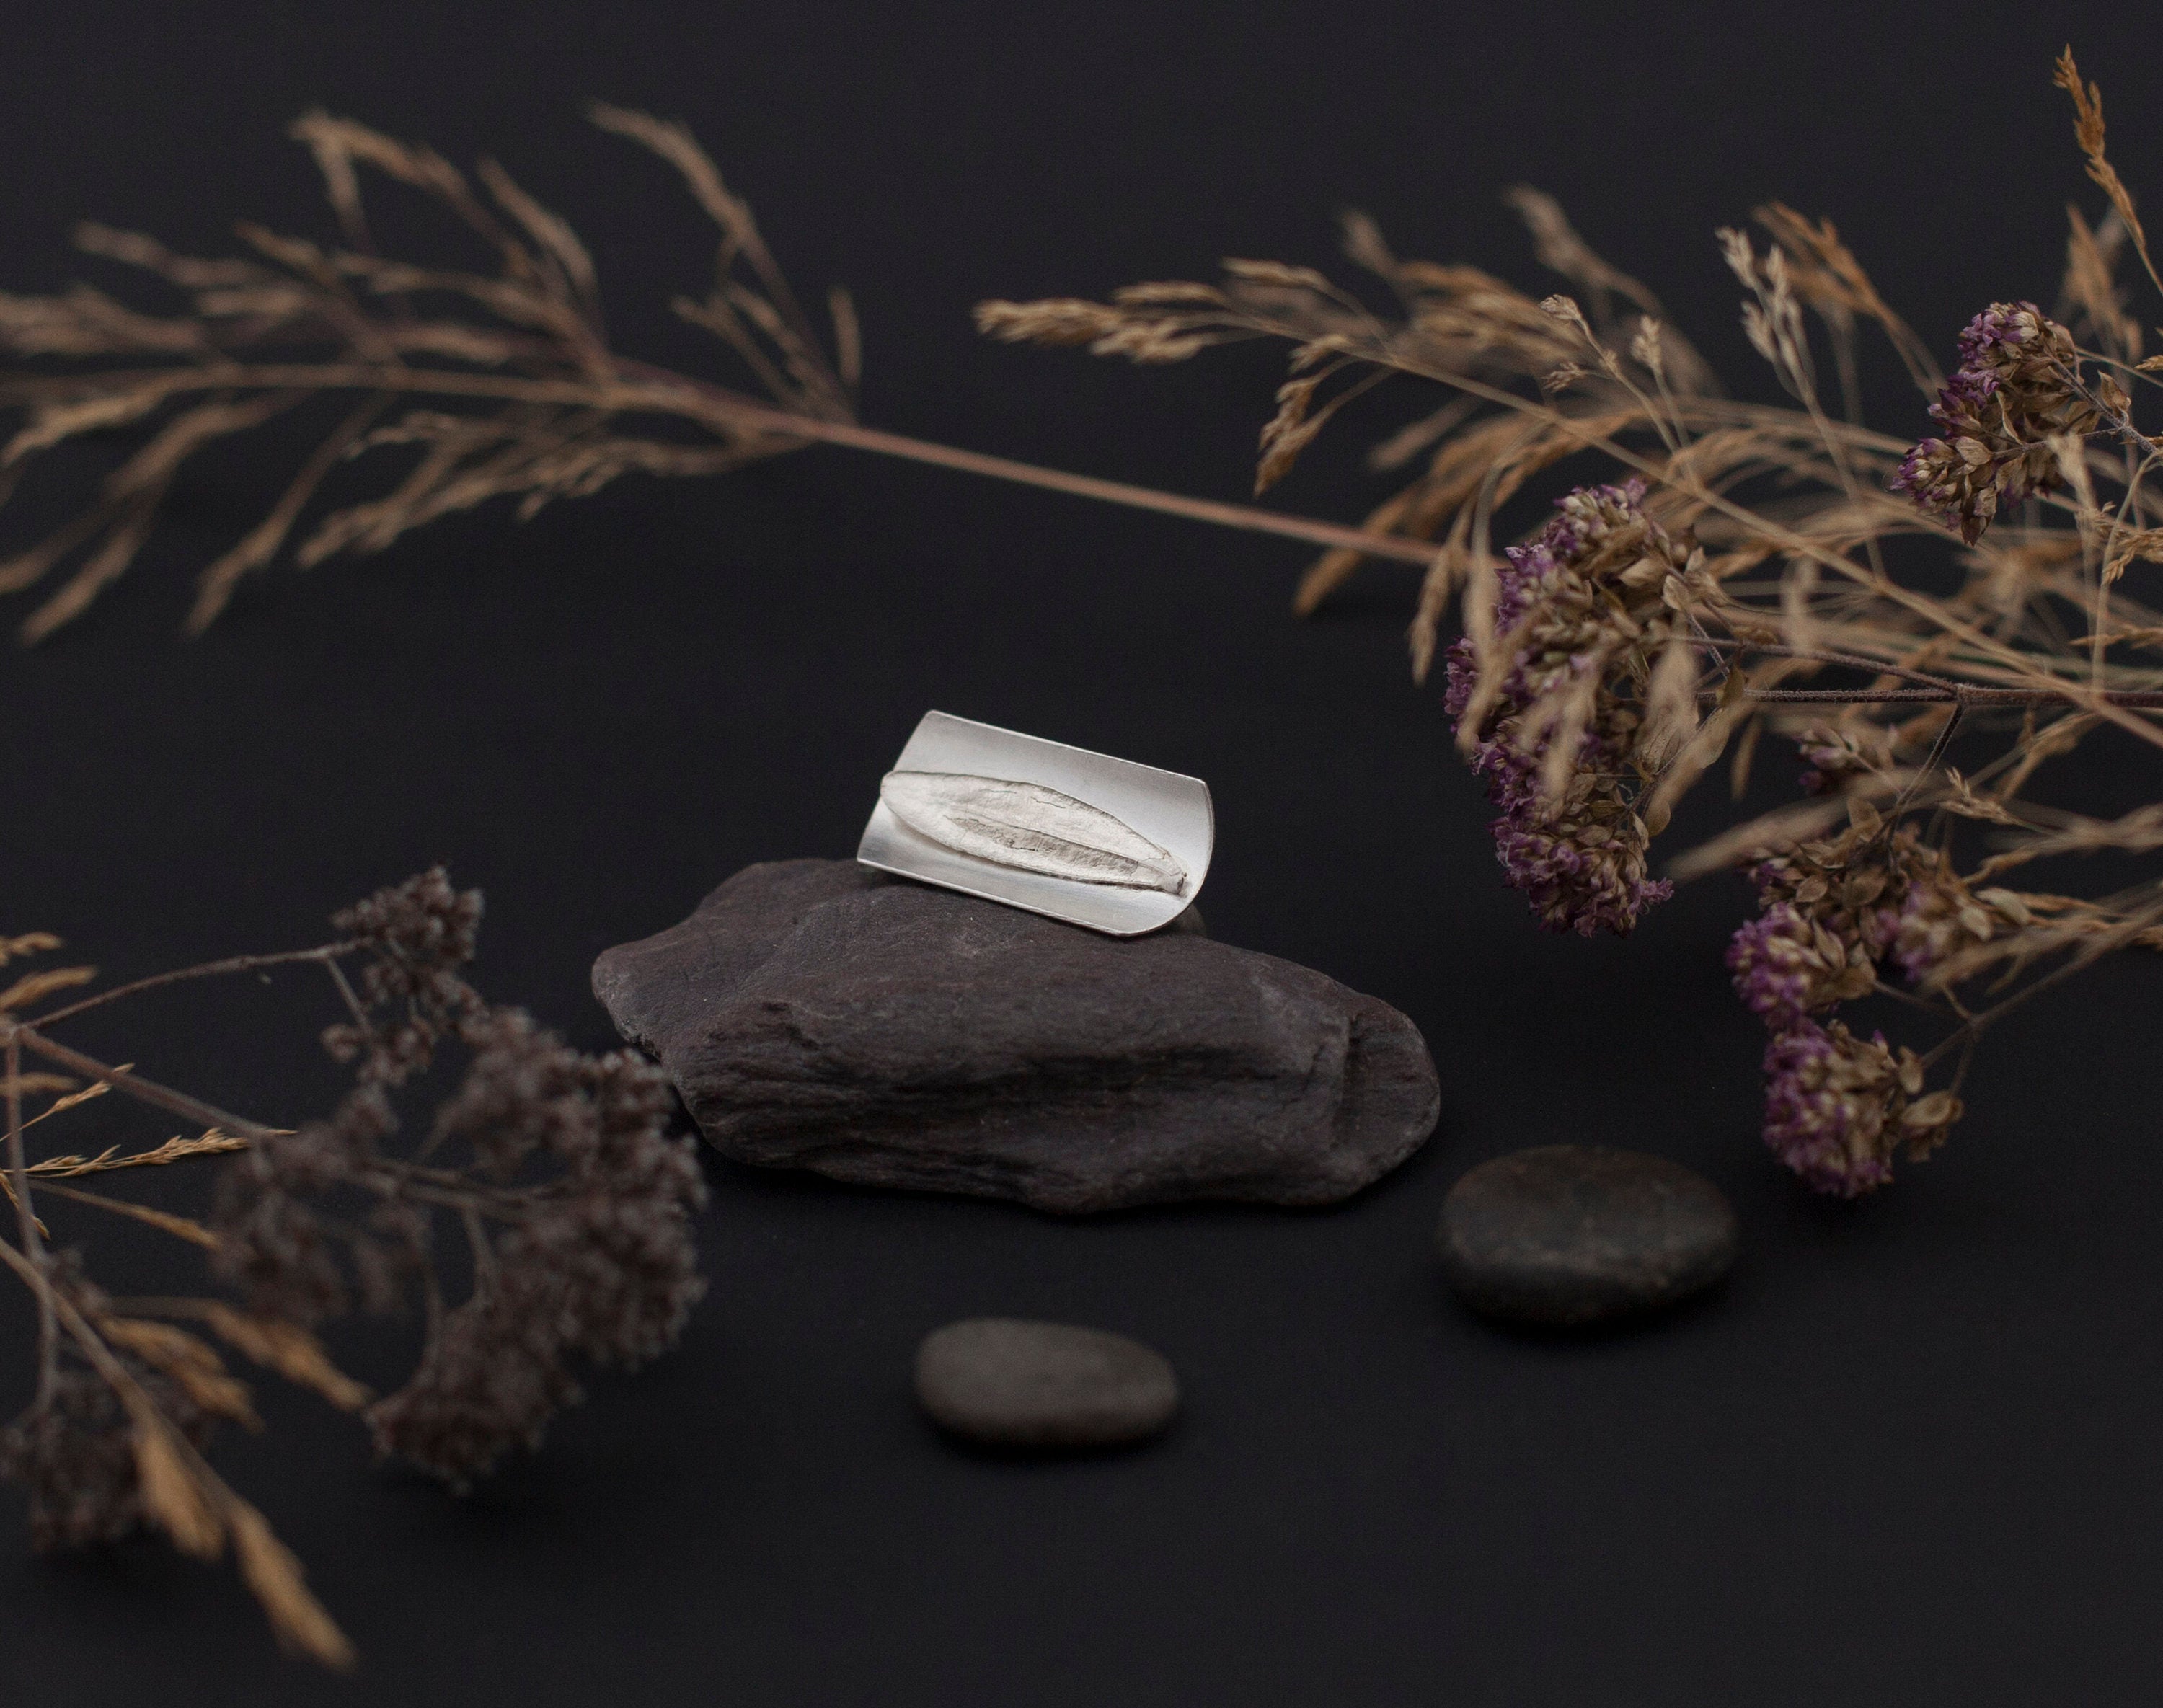 OOAK • Silver ring with casted leaf • size 8 1/2  (in stock, ready to ship)